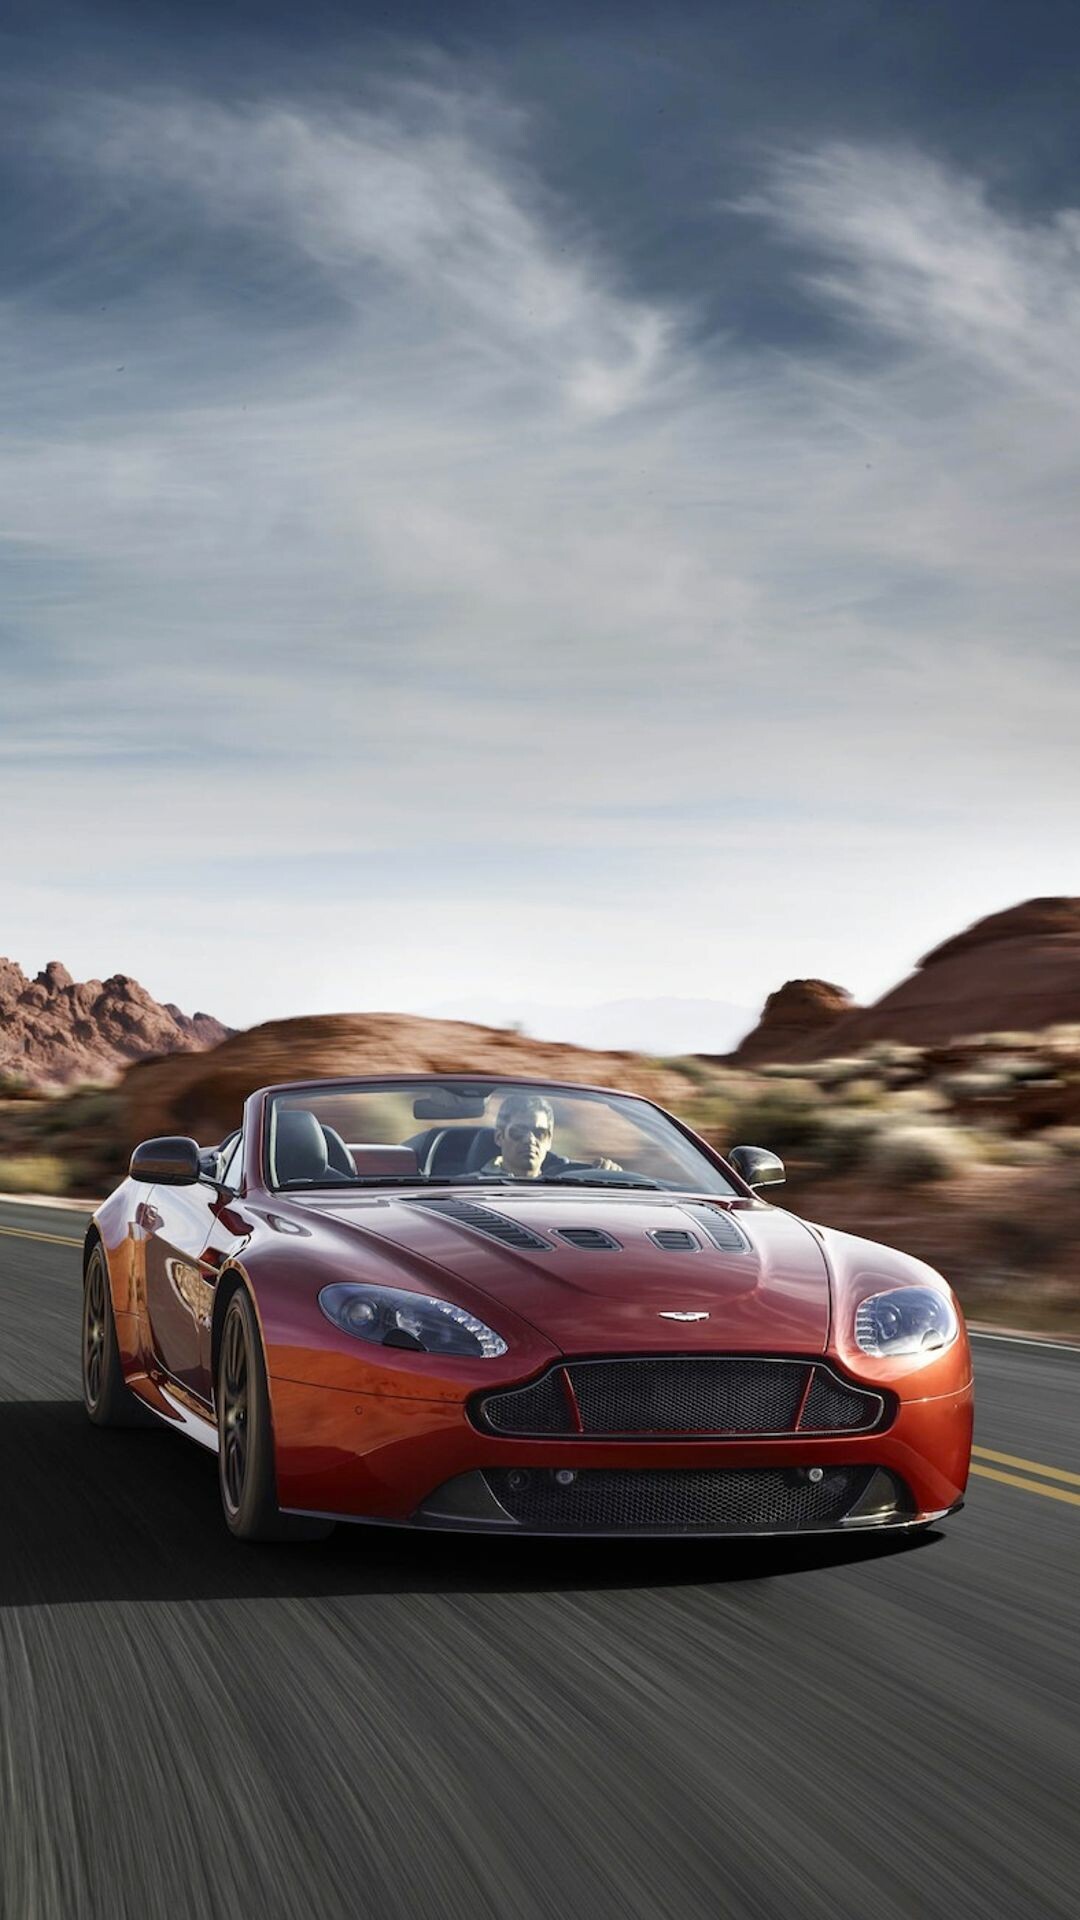 Aston Martin: A British independent manufacturer of luxury sports cars and grand tourers, V12 Vantage S Roadster. 1080x1920 Full HD Background.